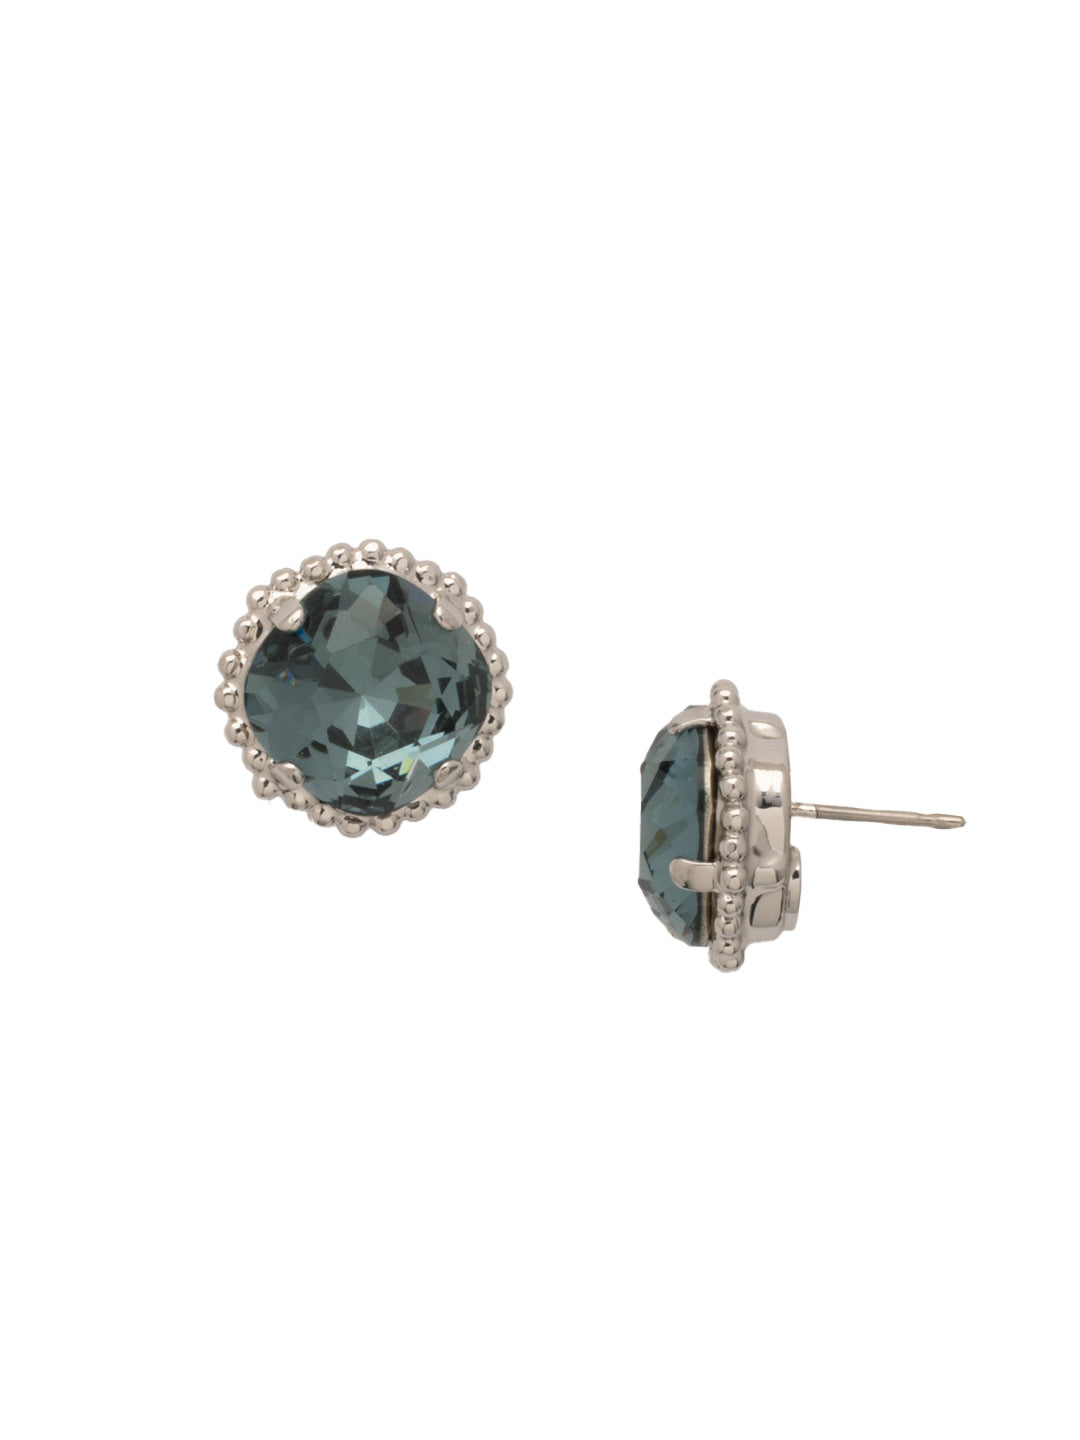 Cushion-Cut Solitaire Stud Earrings - EBX10PDASP - <p>All around allure; the Cushion-Cut Solitaire Stud Earring features a rounded-edge, cushion cut stone that is encircled by a vintage inspired decorative, edged border. A post backing ensures comfortable, everyday wear. From Sorrelli's Aspen SKY collection in our Palladium finish.</p>